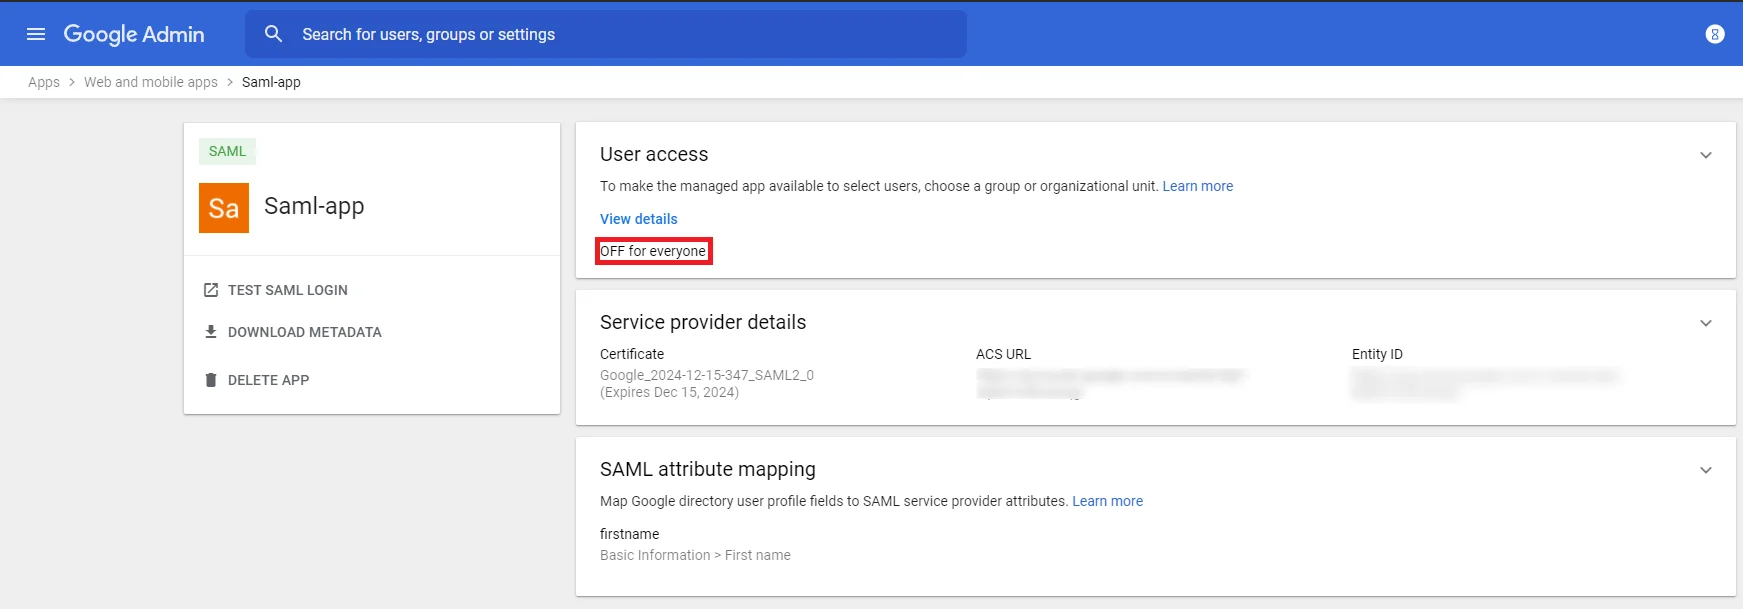 Configure Google Apps as IDP - SAML Single Sign-On(SSO) for Magento - Google Apps SSO Login, Turn-On go to SAML Apps | Magento Google Apps | Magento Google Apps login | Google Apps sso using magento | Google Apps magento